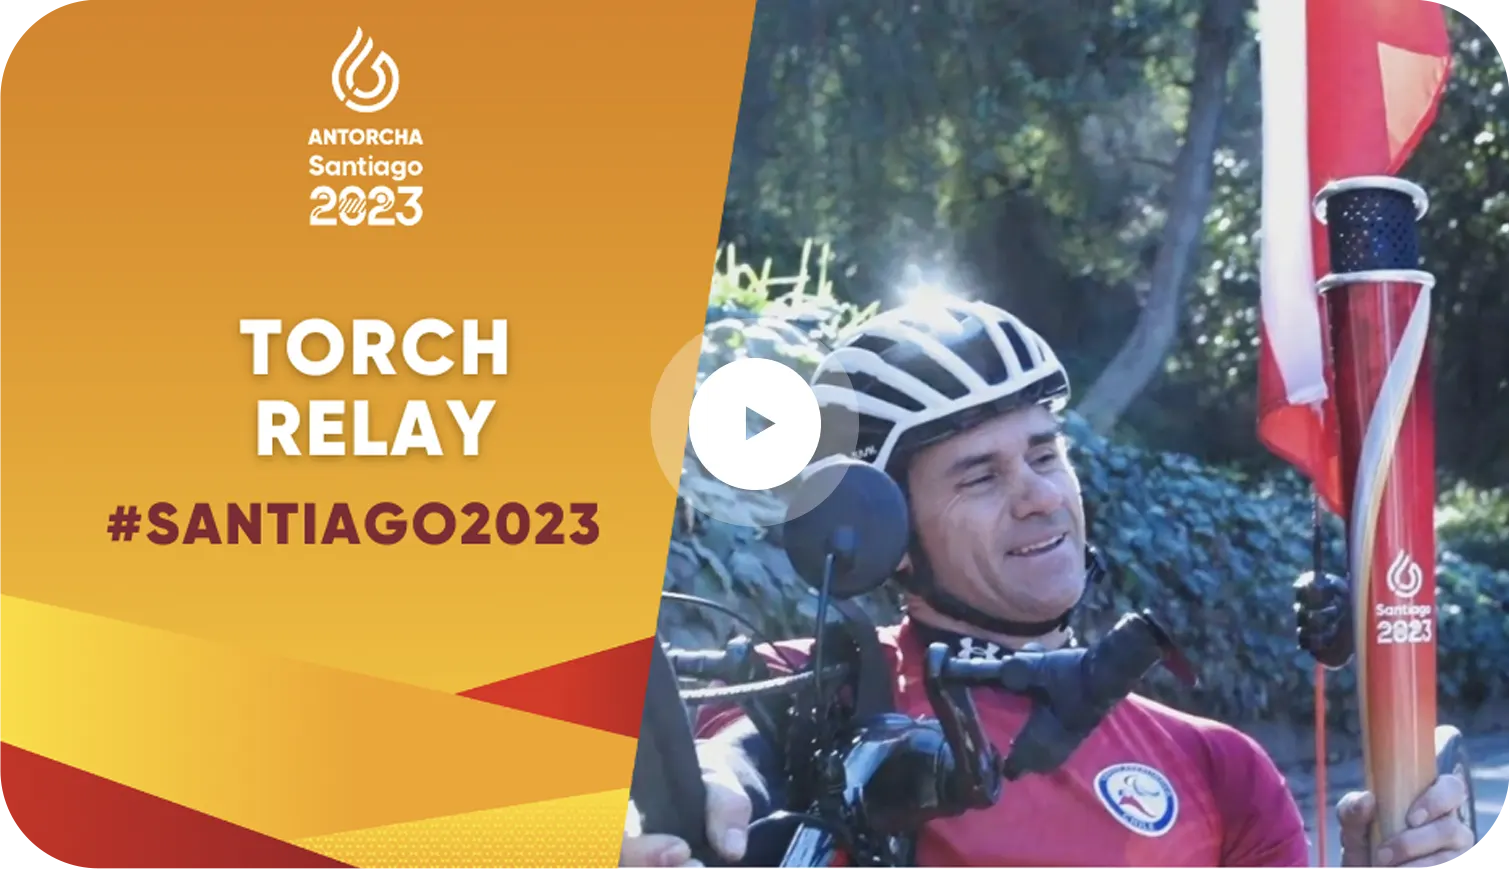 THIS IS THE VIDEO THAT TEACHES US ABOUT THE TORCH RELAY PROGRAM OF THE SANTIAGO 2023 PAN AMERICAN AND PARAPAN AMERICAN GAMES